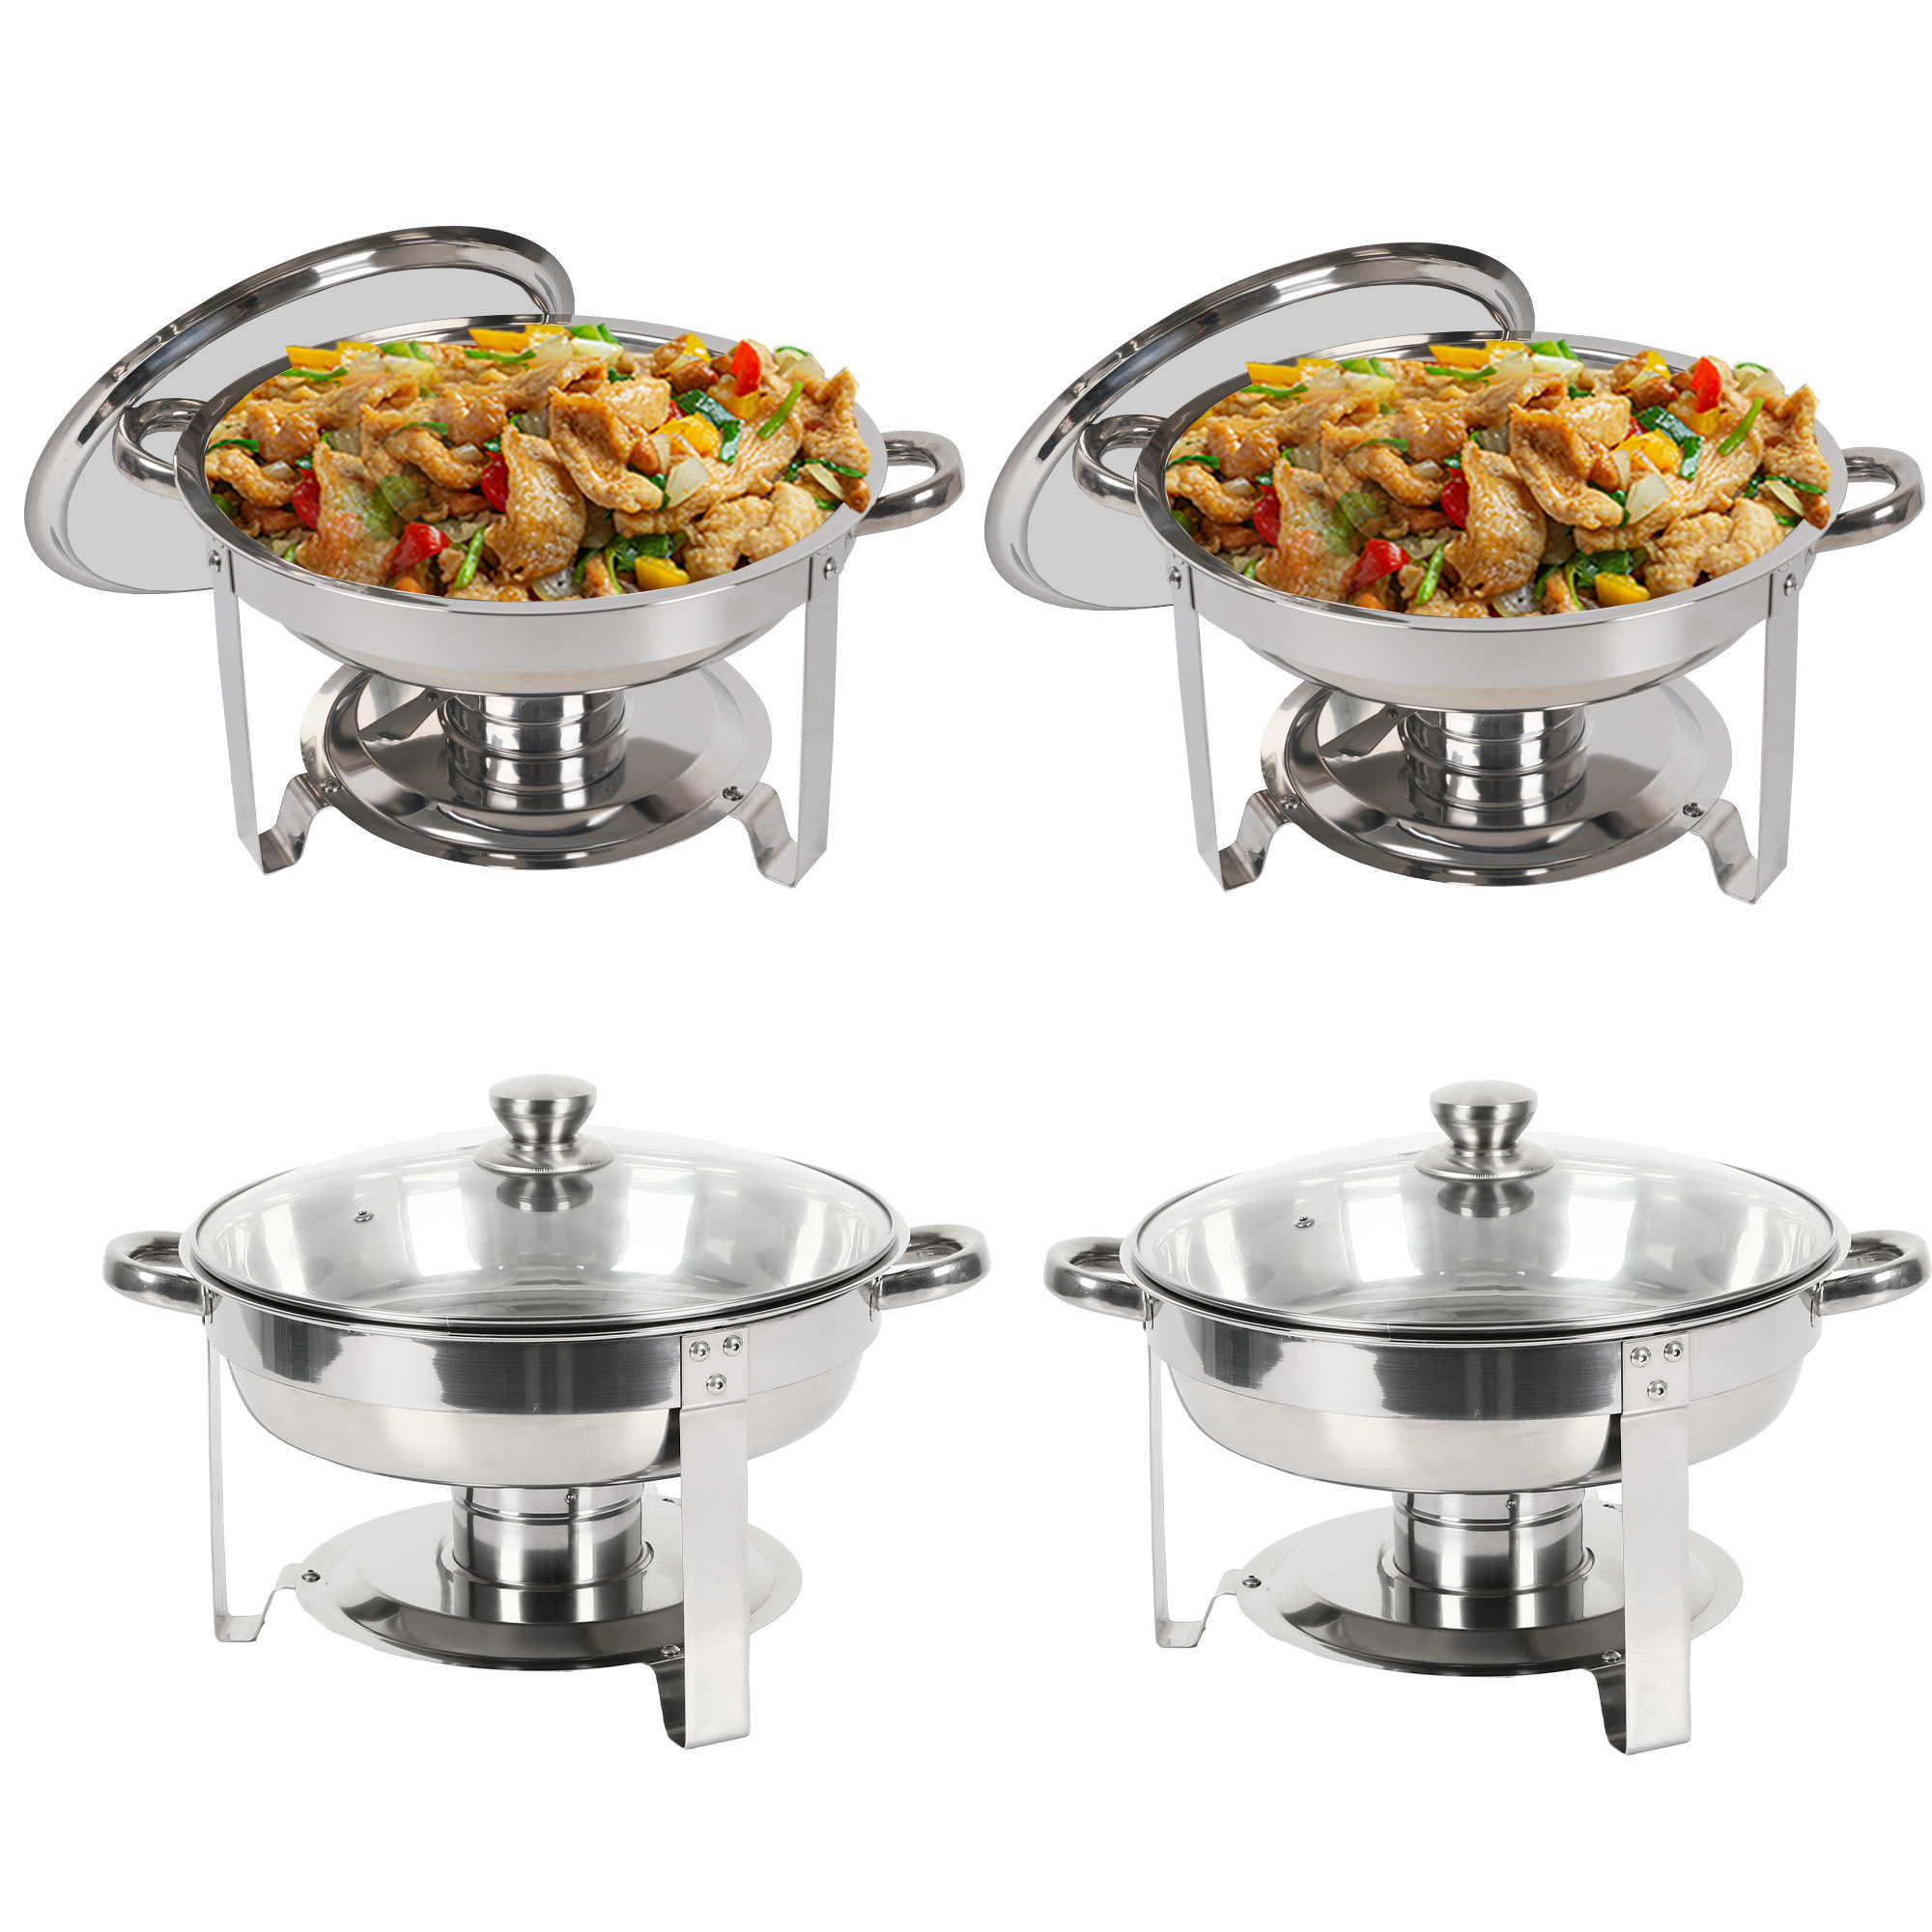 Dutch Oven Lid Lifter and Stand 2 piece set -Dutch oven camp